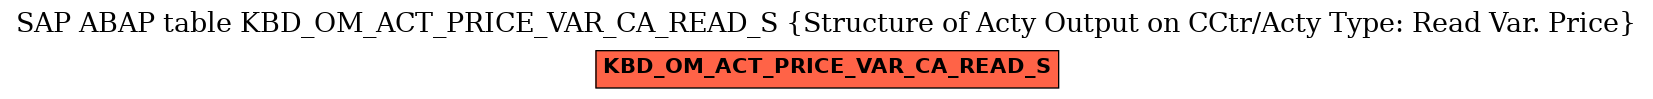 E-R Diagram for table KBD_OM_ACT_PRICE_VAR_CA_READ_S (Structure of Acty Output on CCtr/Acty Type: Read Var. Price)